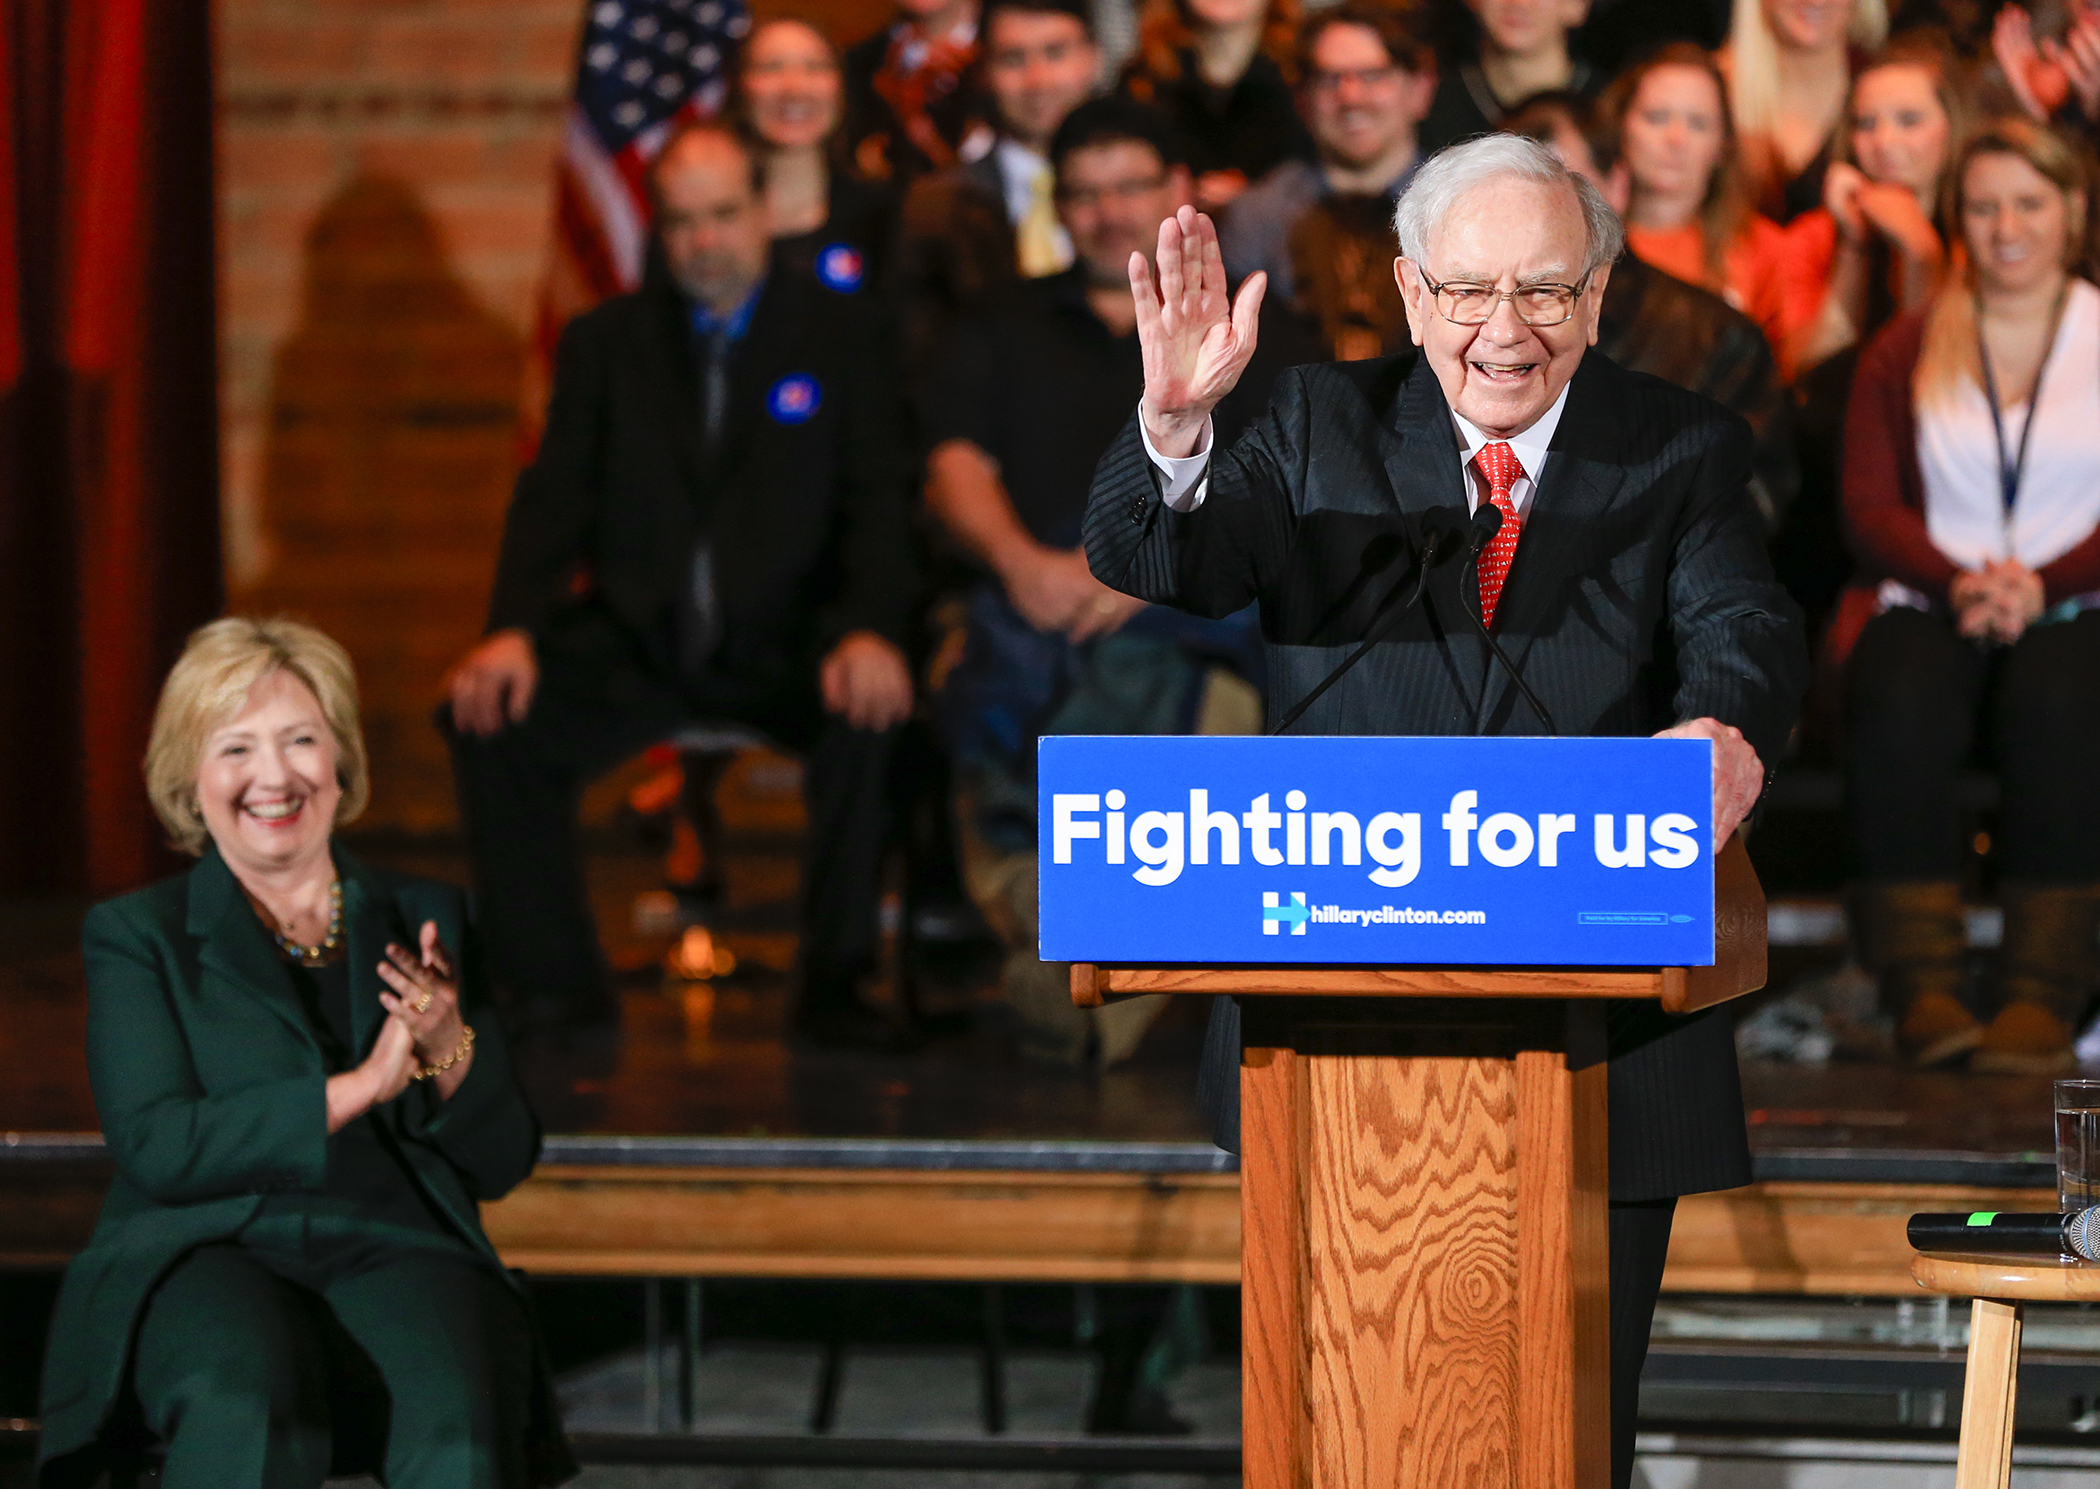 Why Warren Buffett Is Campaigning for Hillary Clinton—And How Much He's Spending To Do It